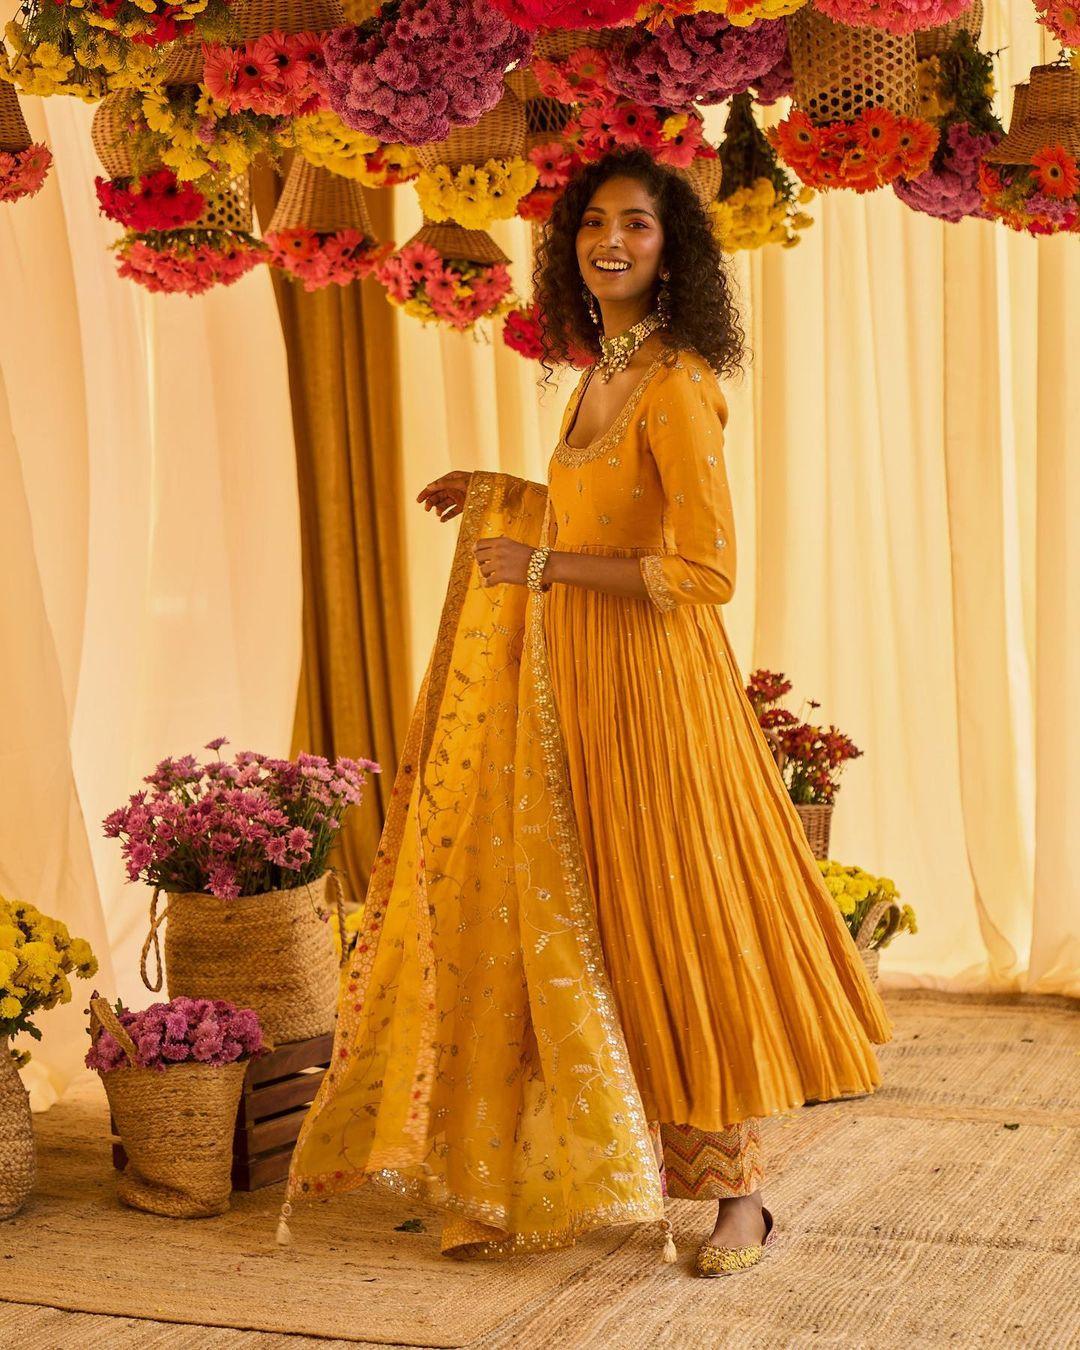 Best Haldi Ceremony Outfits and Dresses Ideas for Bride – tapee.in